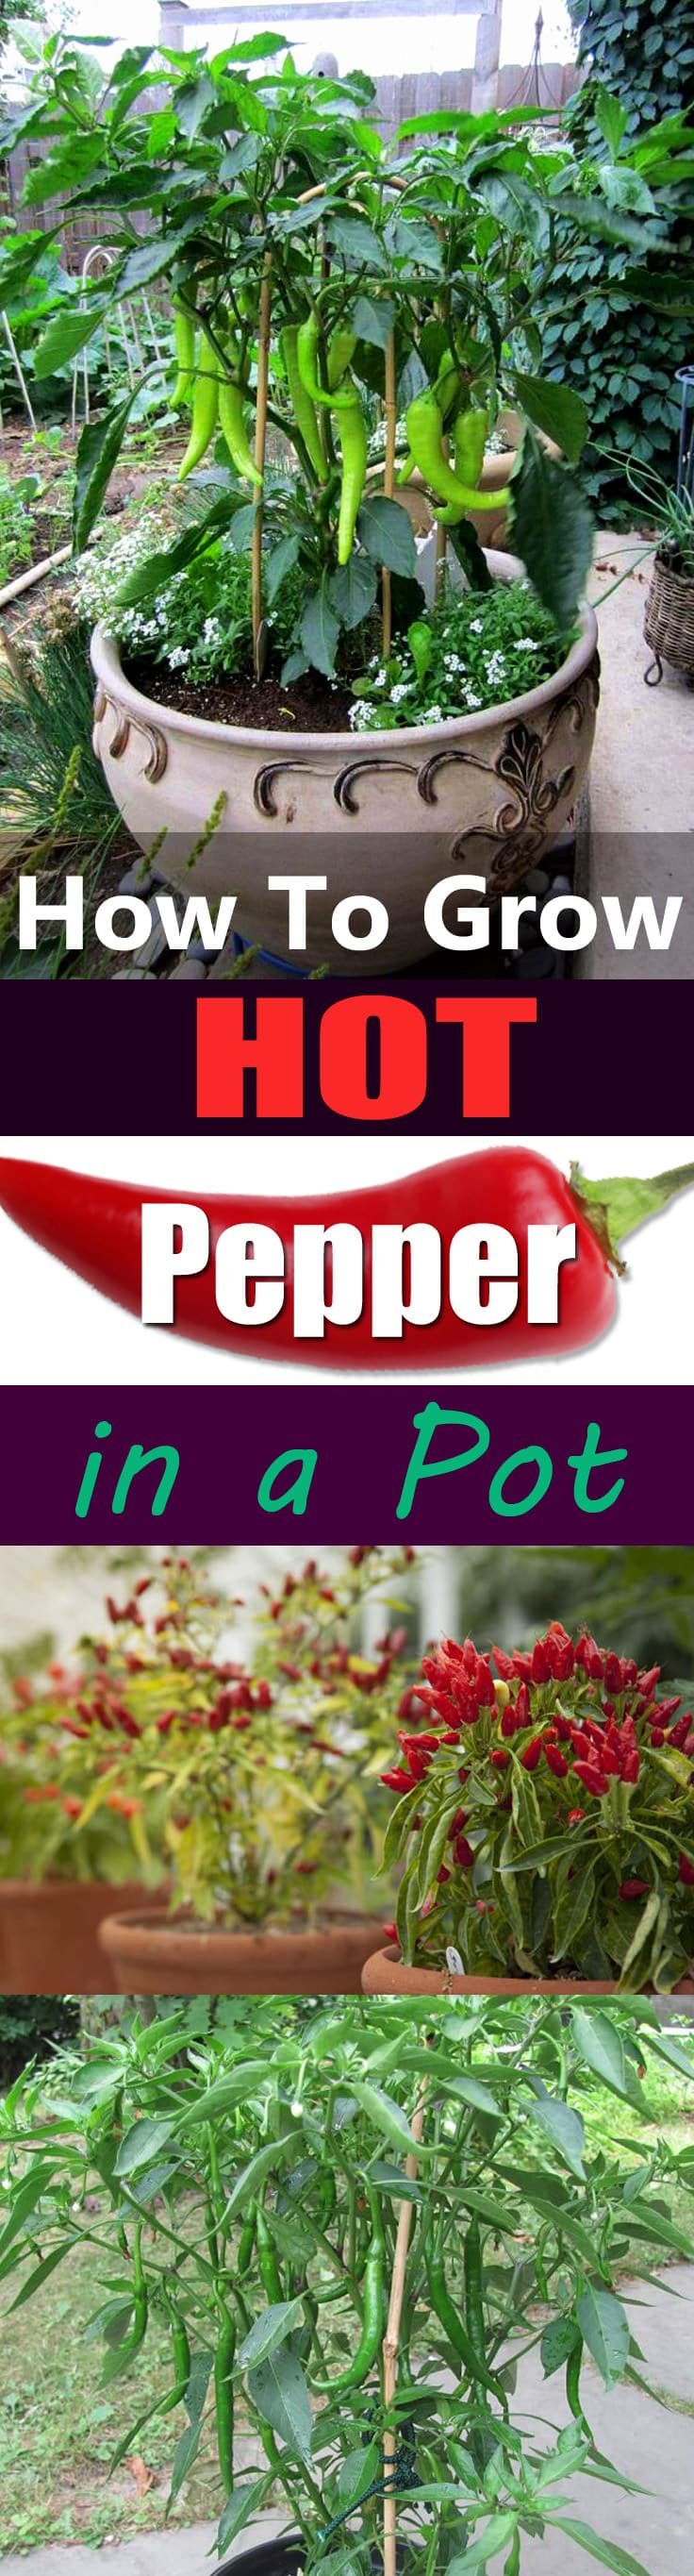 Growing hot peppers in containers is so easy and productive. Here's everything you need to know!